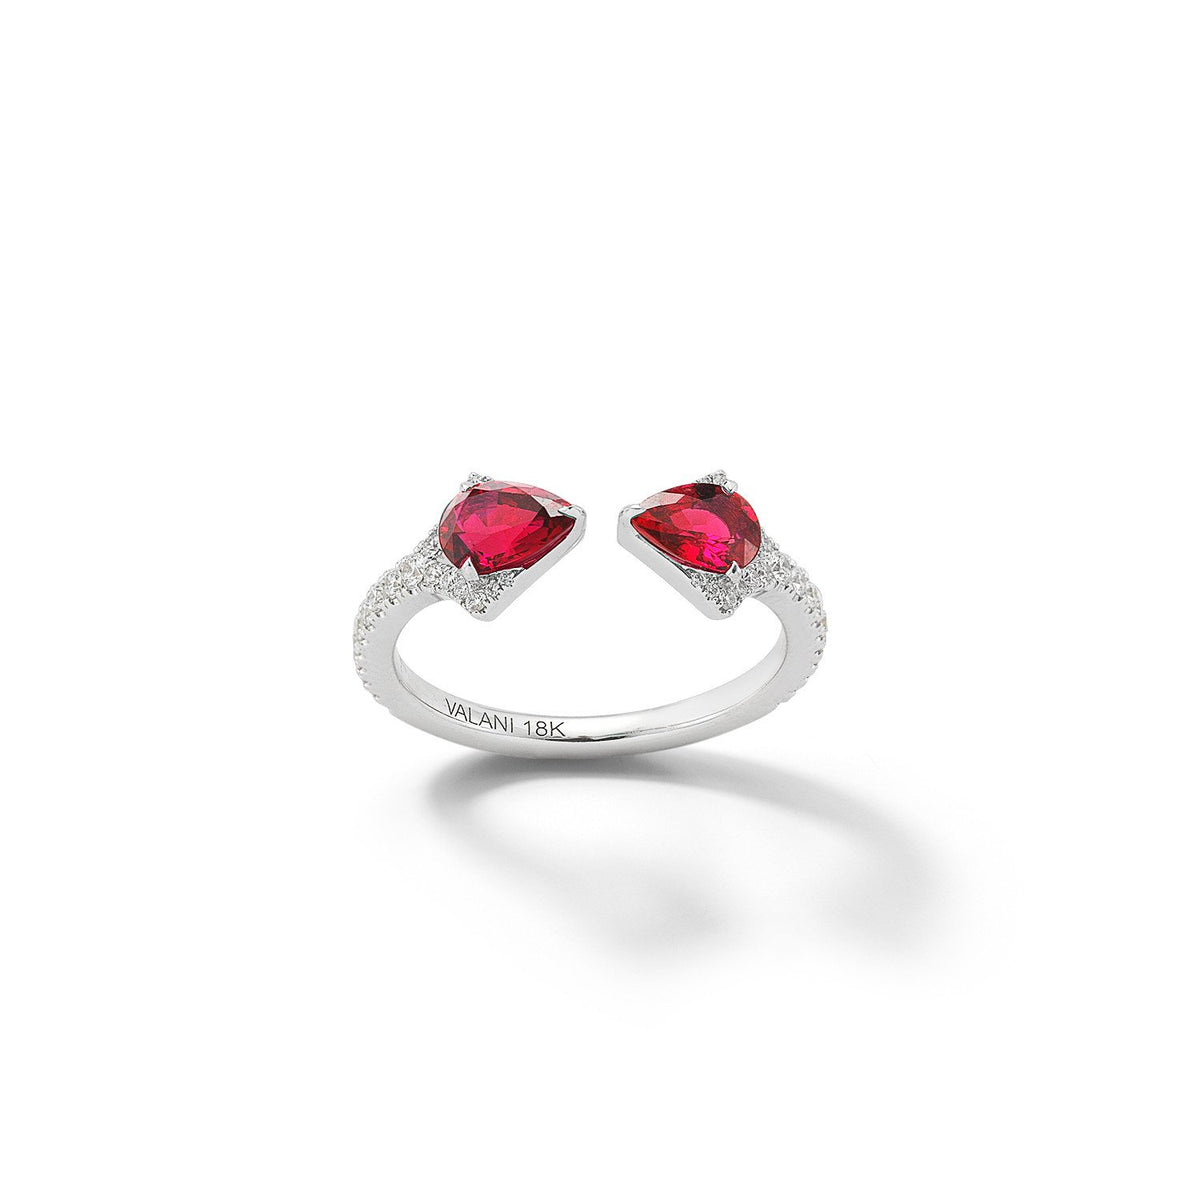 Valani 18K White Gold Rival Ruby Two Stone Ring